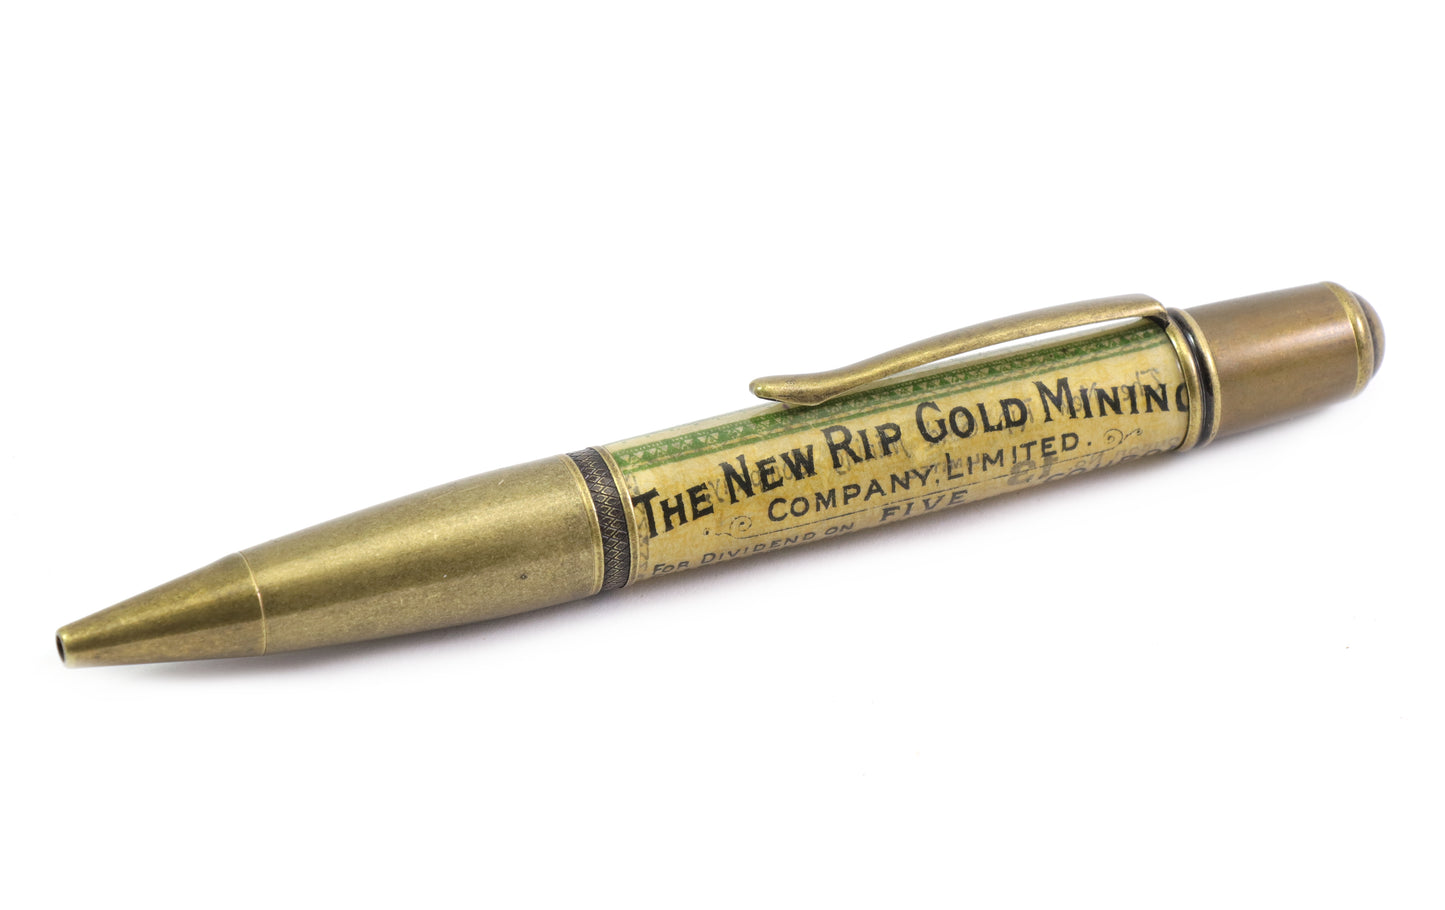 Vintage New Rip Gold Mining Co Stock Pen